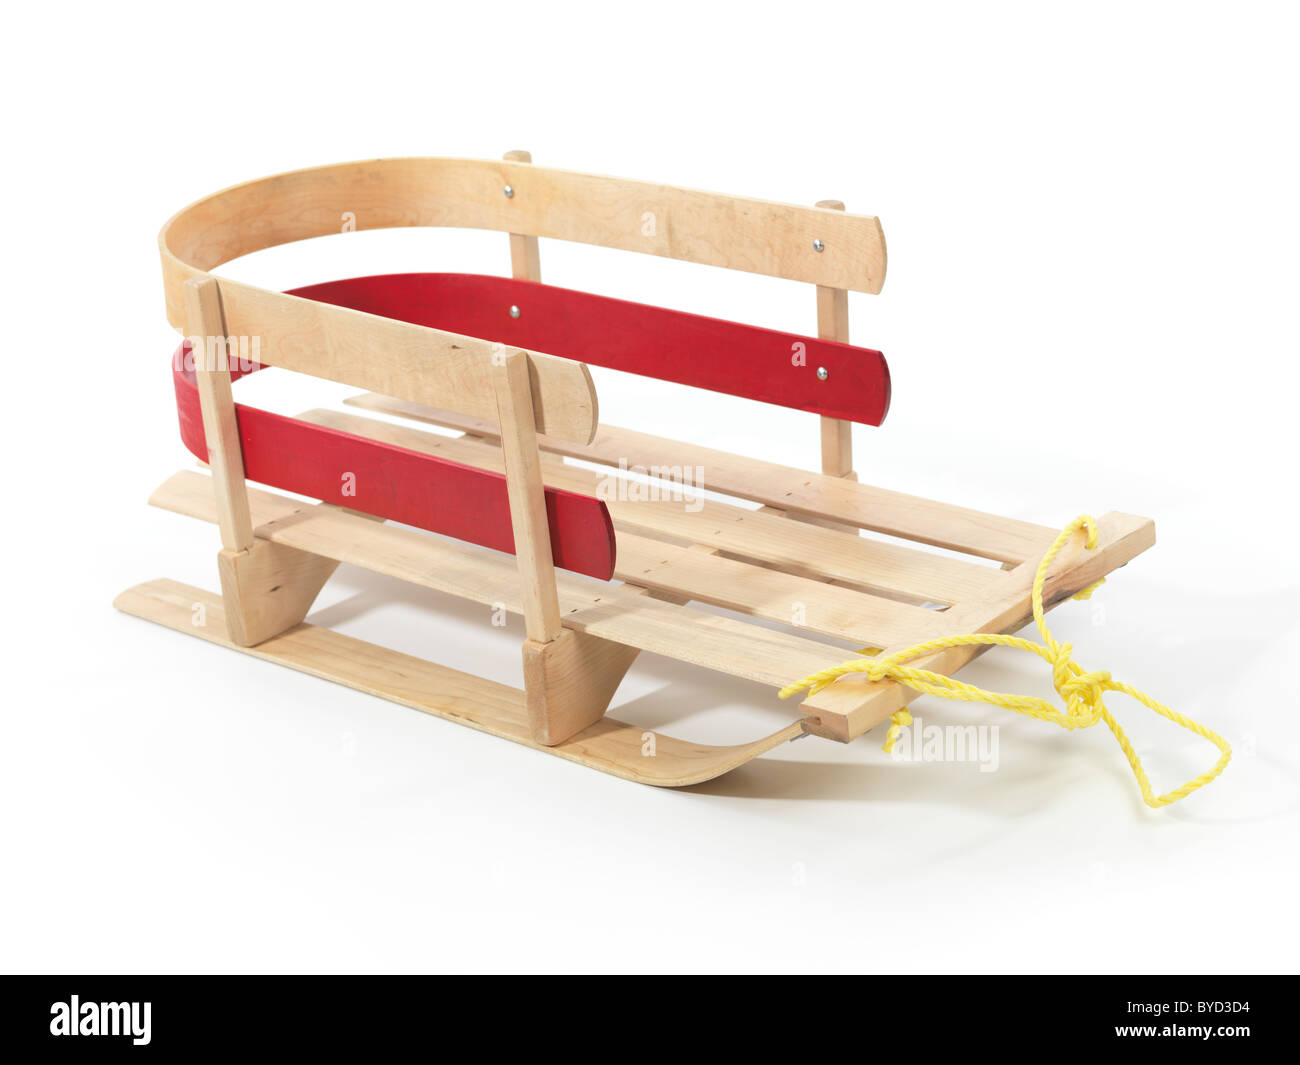 Wooden baby sled, sleigh isolated on white background Stock Photo